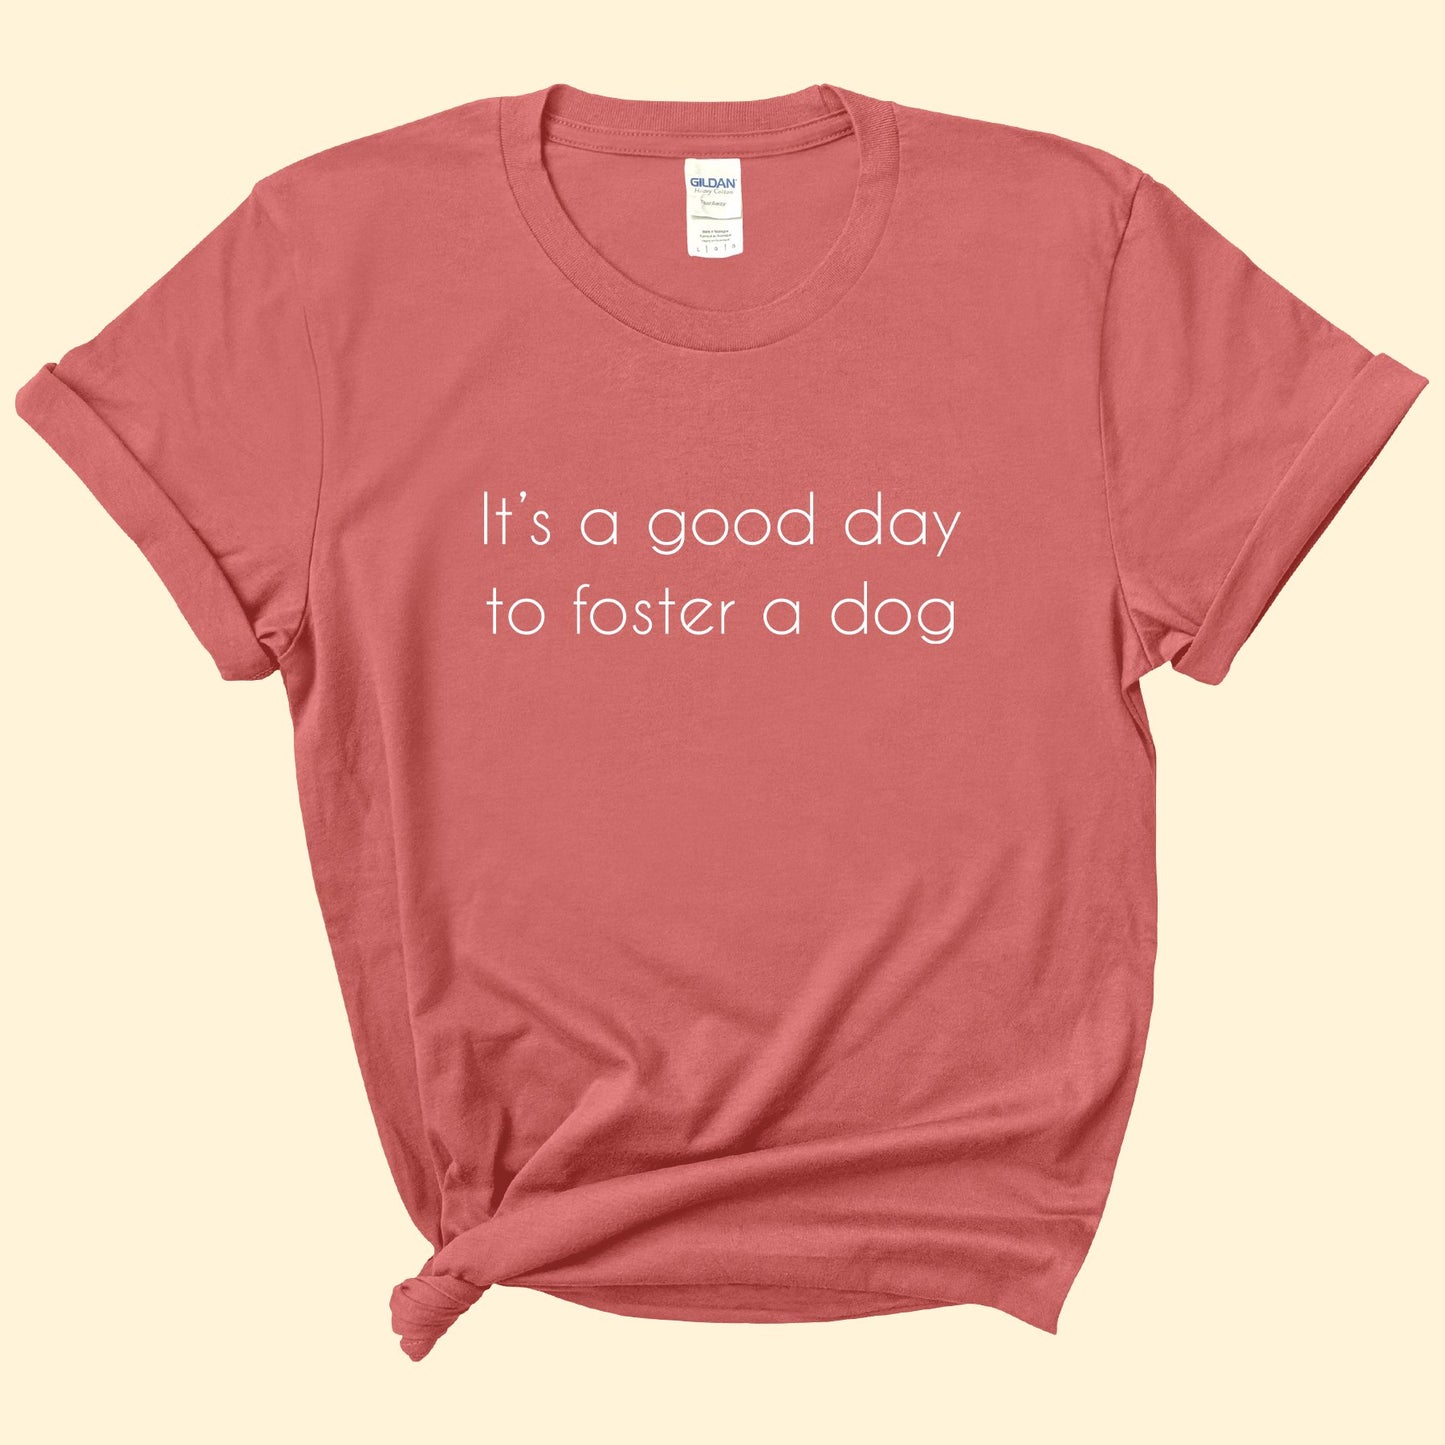 It's A Good Day To Foster A Dog | Text Tees - Detezi Designs-10497951681739573665